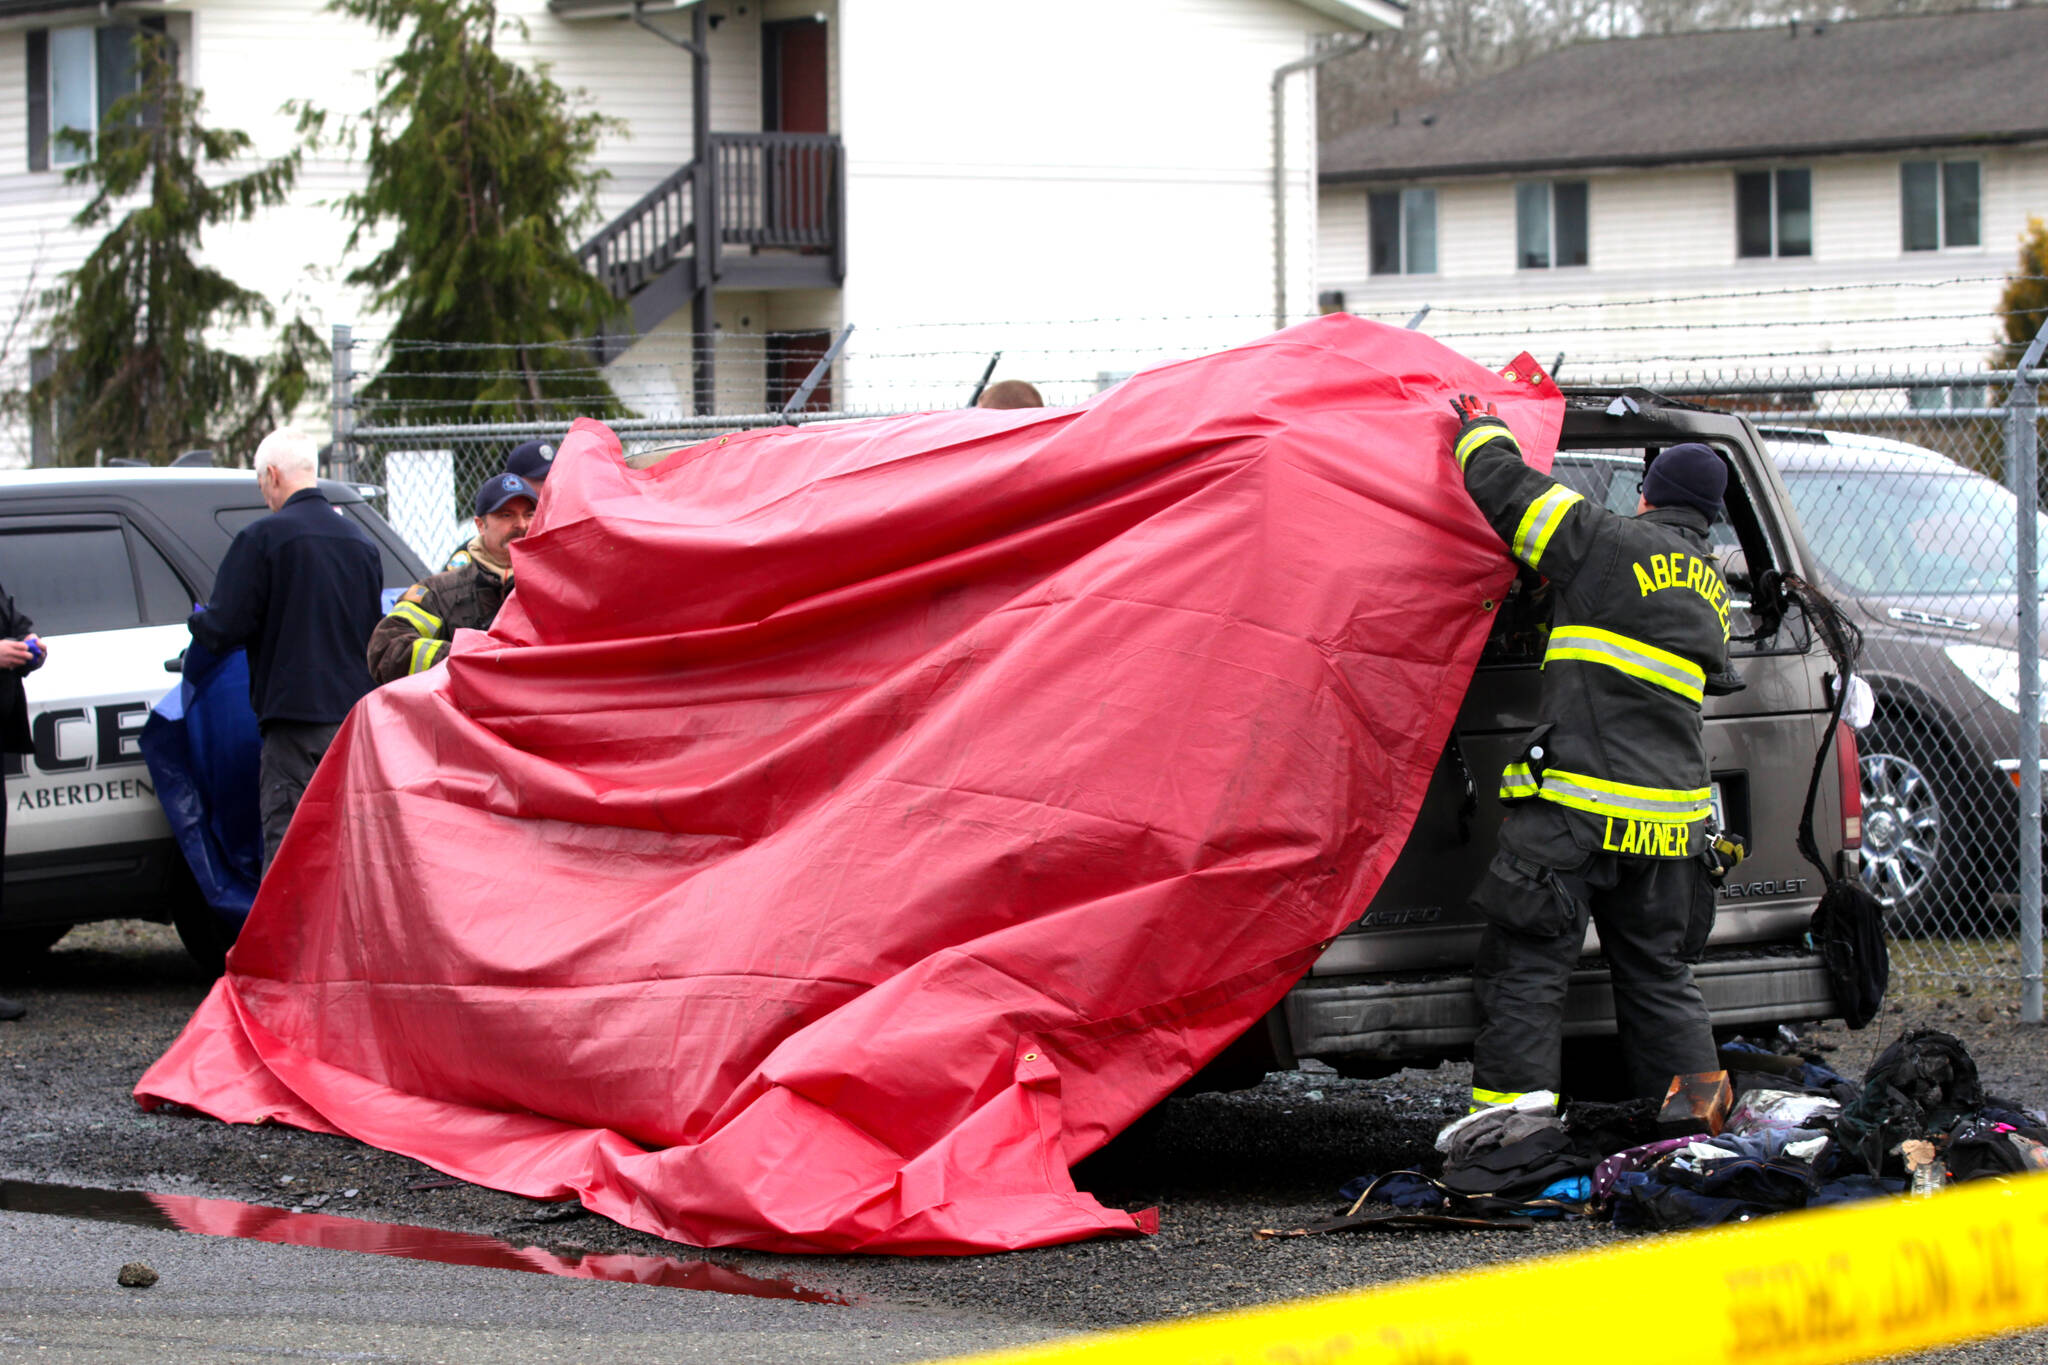 Firefighters stretch a tarp over the aftermath of a vehicle fire that killed a man in South Aberdeen on Tuesday, Jan. 24. (Michael S. Lockett / The Daily World)